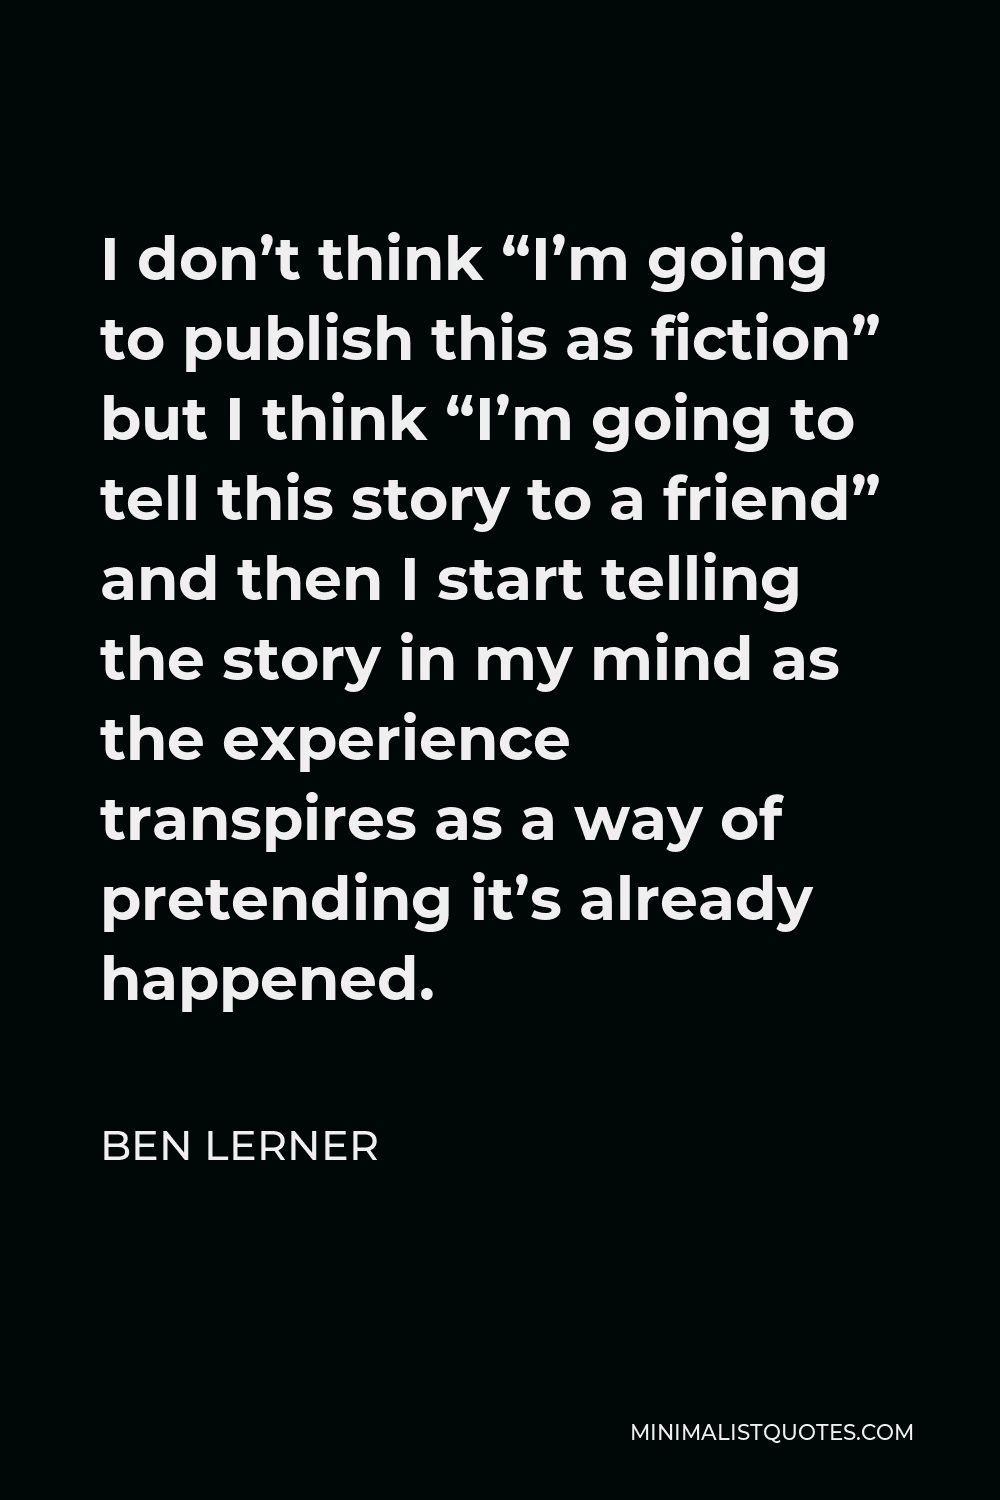 Ben Lerner Quote - I don’t think “I’m going to publish this as fiction” but I think “I’m going to tell this story to a friend” and then I start telling the story in my mind as the experience transpires as a way of pretending it’s already happened.